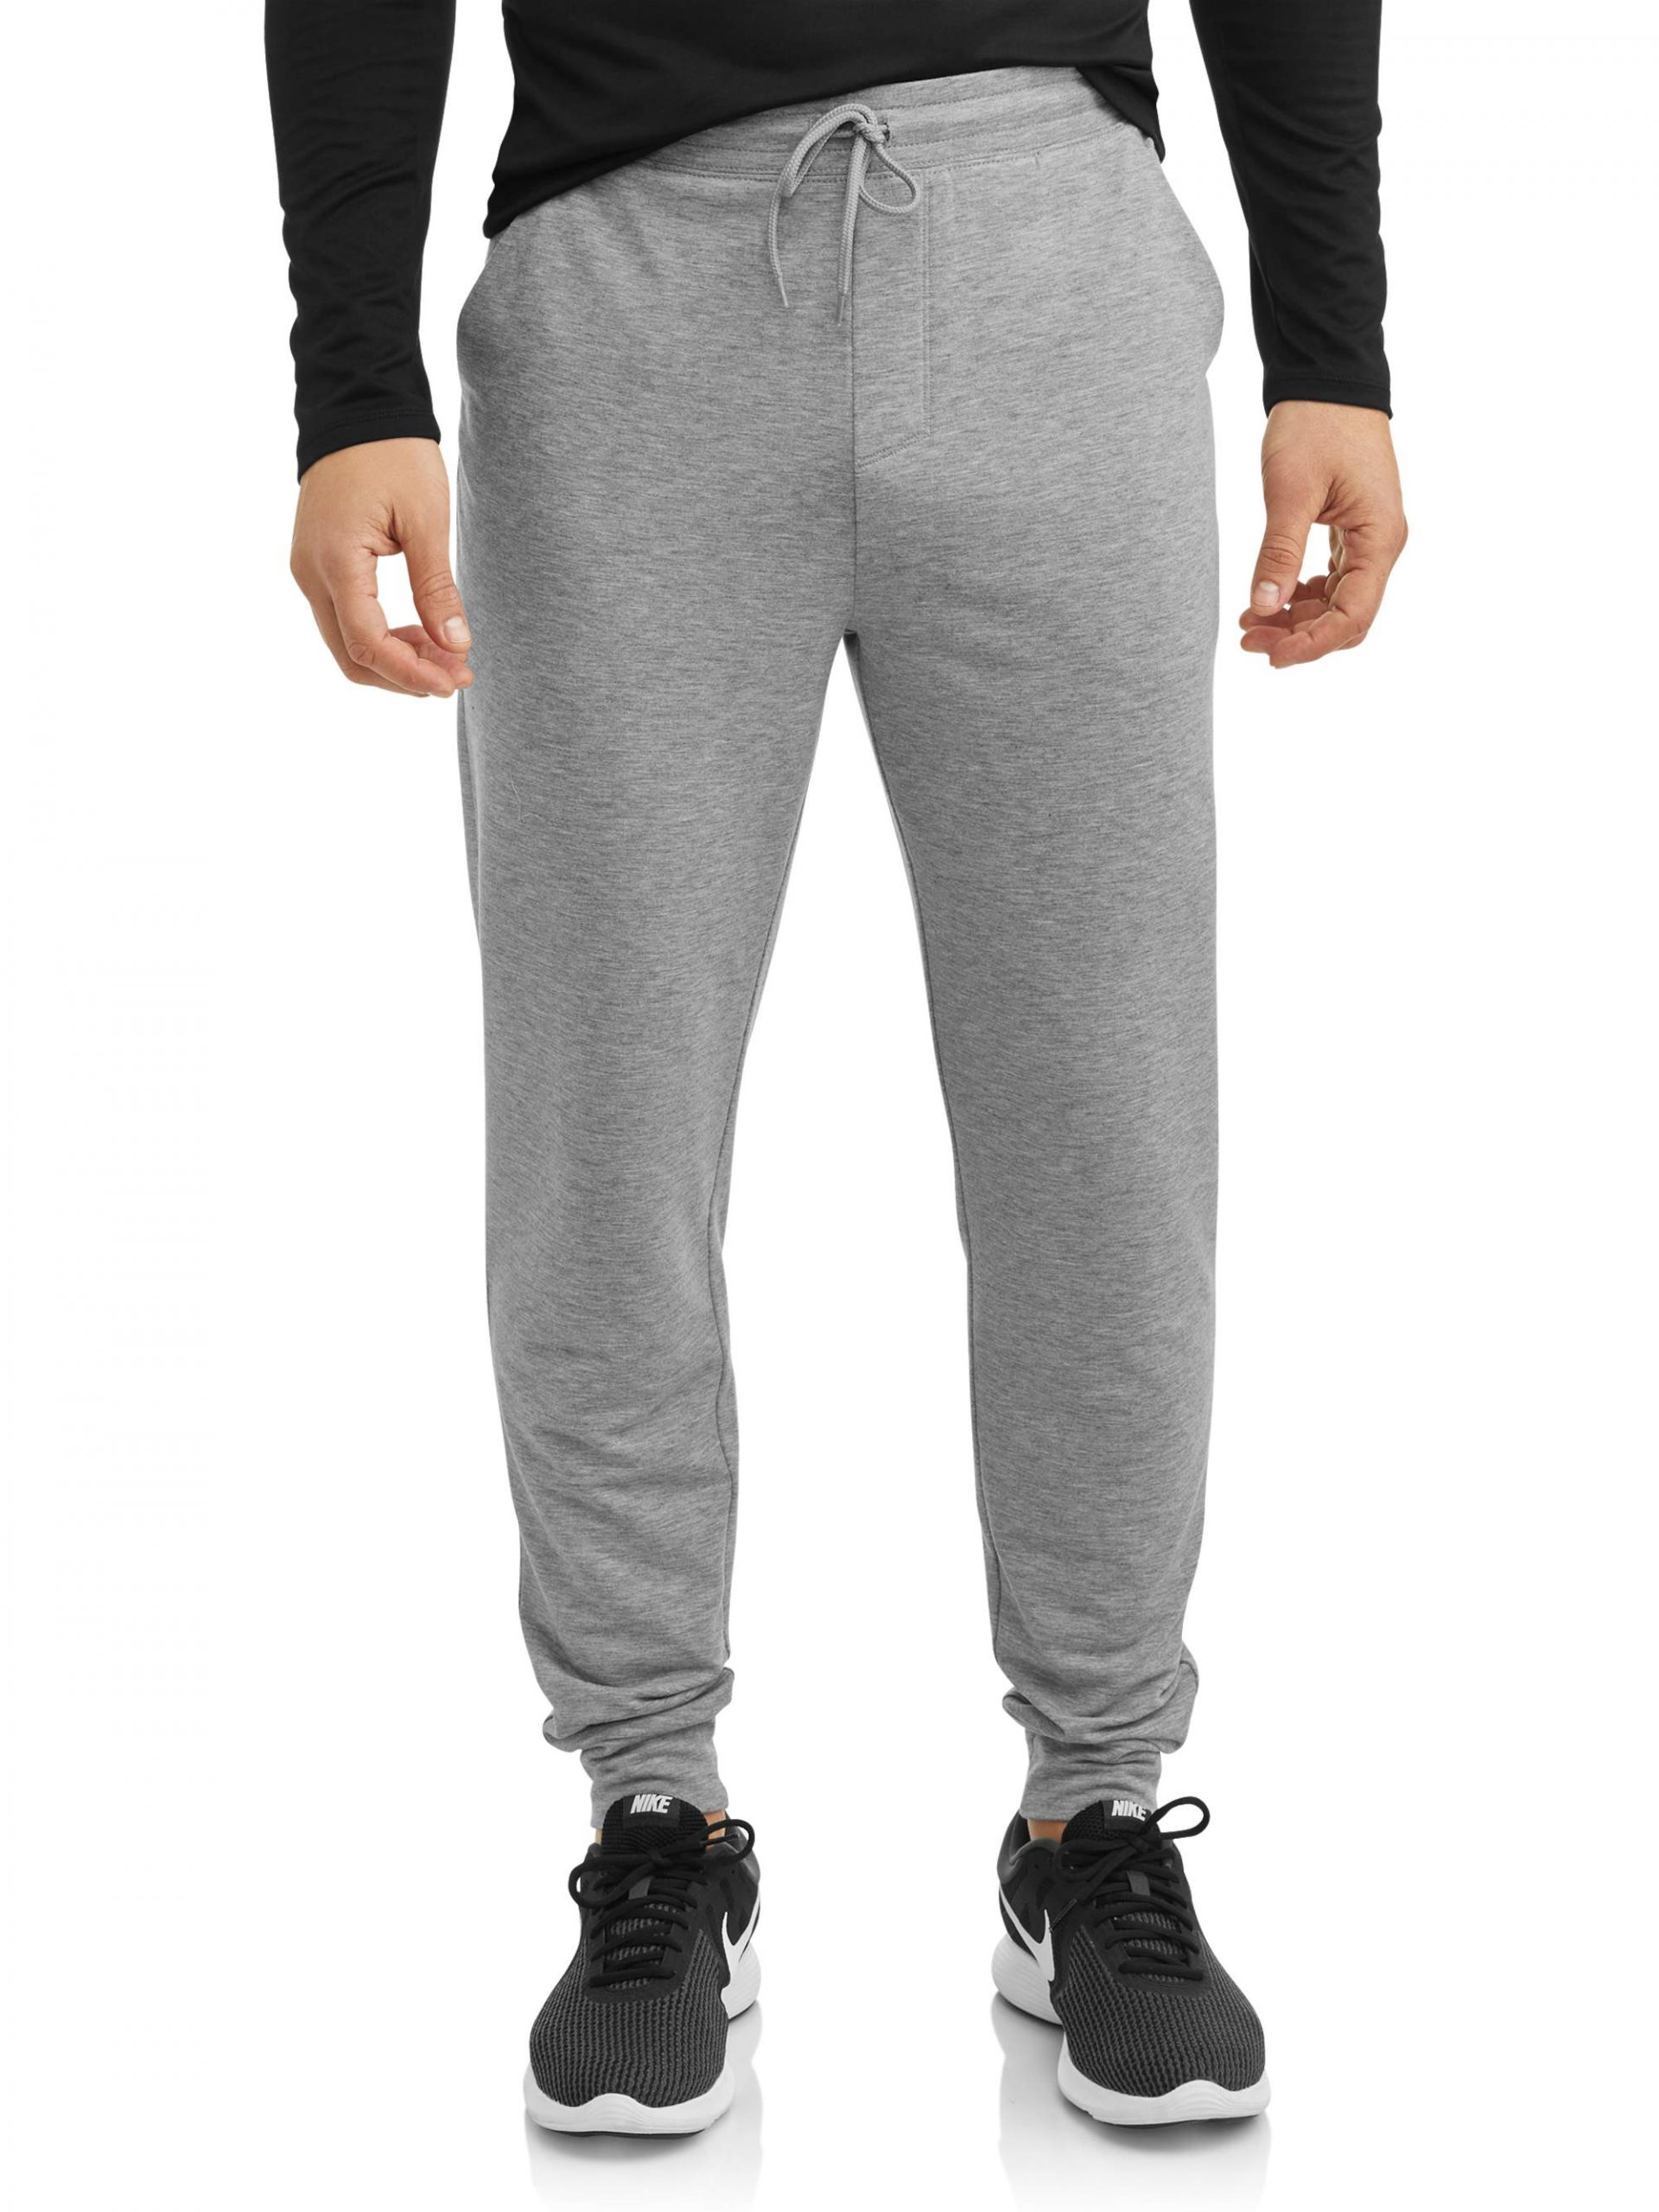 Athletic Works Men’s Knit Joggers | stormywillborn